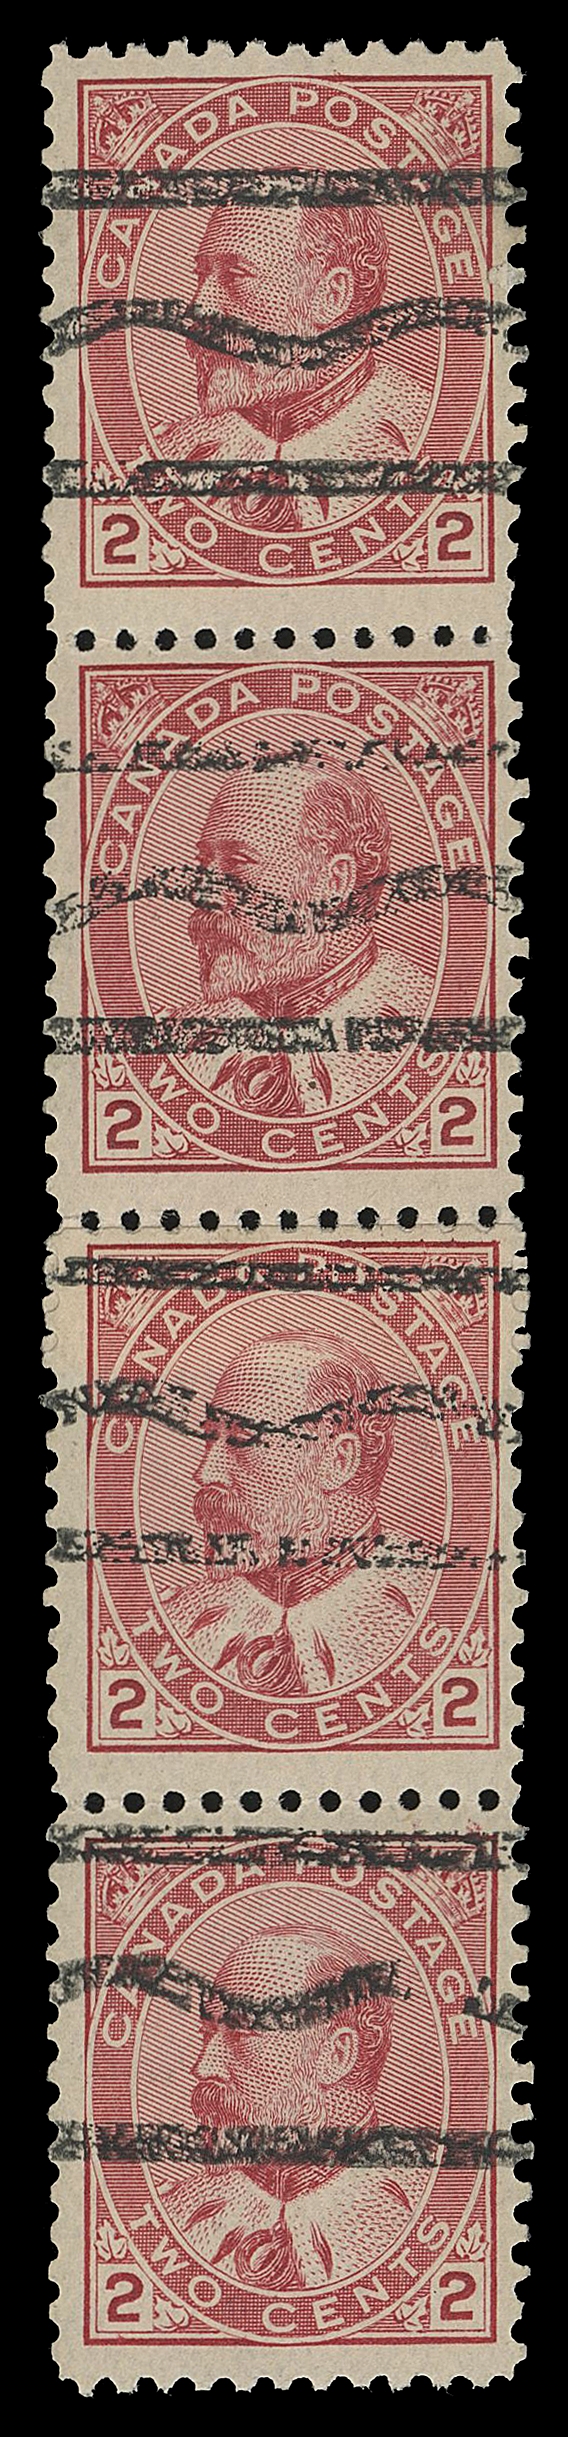 CANADA -  7 KING EDWARD VII  89xxx/90xxxi,Six vertical format coil strips of four or larger (one is composed of two 2c Style S precancelled pairs). Includes three with roller or precancels (with OG or NH), one has paste-up. While other three are mint OG or NH paste-up coil strips; one with faults. Four items pencil signed on reverse (J. Sissons or B. Maresch) and sold on that merit. A scarce lot of these precursor coil stamps.